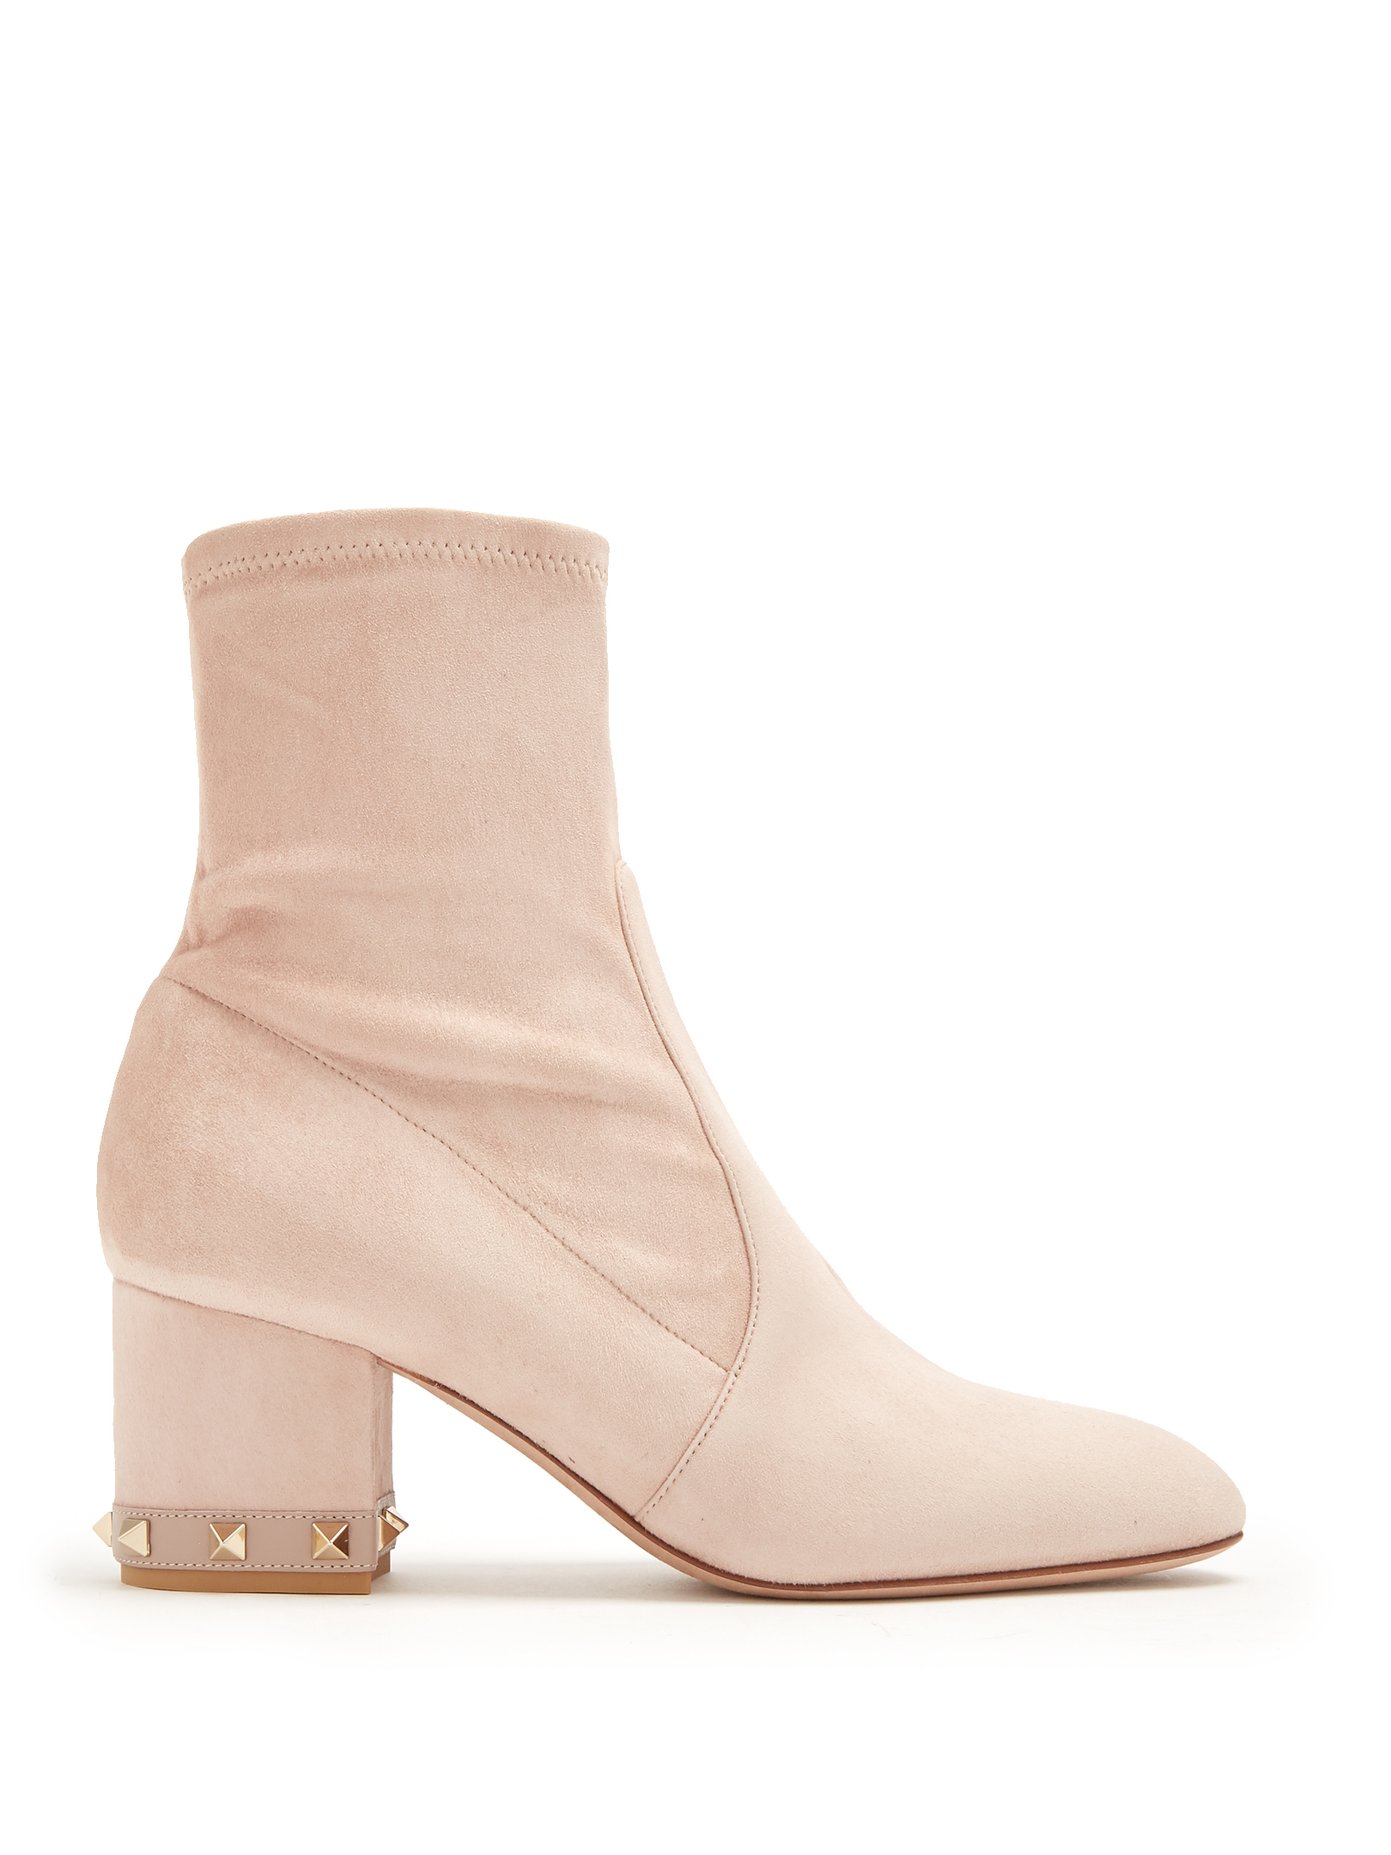 valentino rockstud suede ankle boots